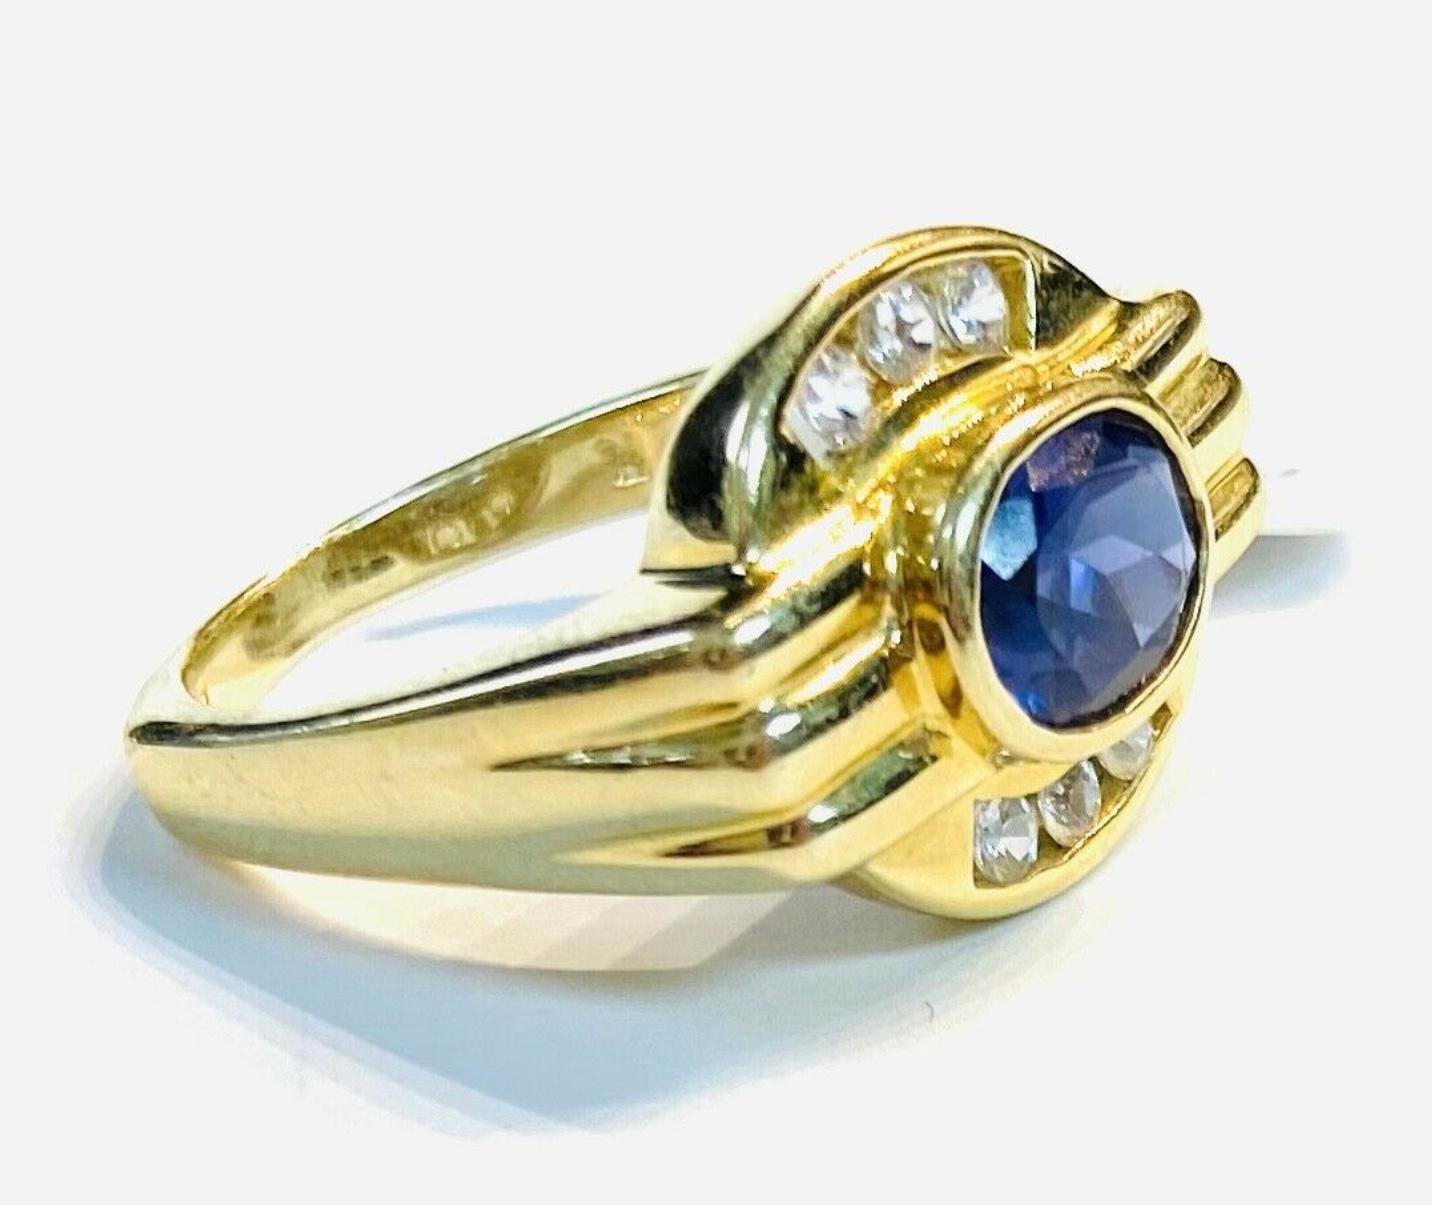 14k yellow gold purple tanzanite and diamond ring, 6.01 Grams TW. The dimensions of the oval tanzanite are approximately 8 mm x 5.5 mm. Approximately 1 carat. Marked 14k. Approximate size 7.